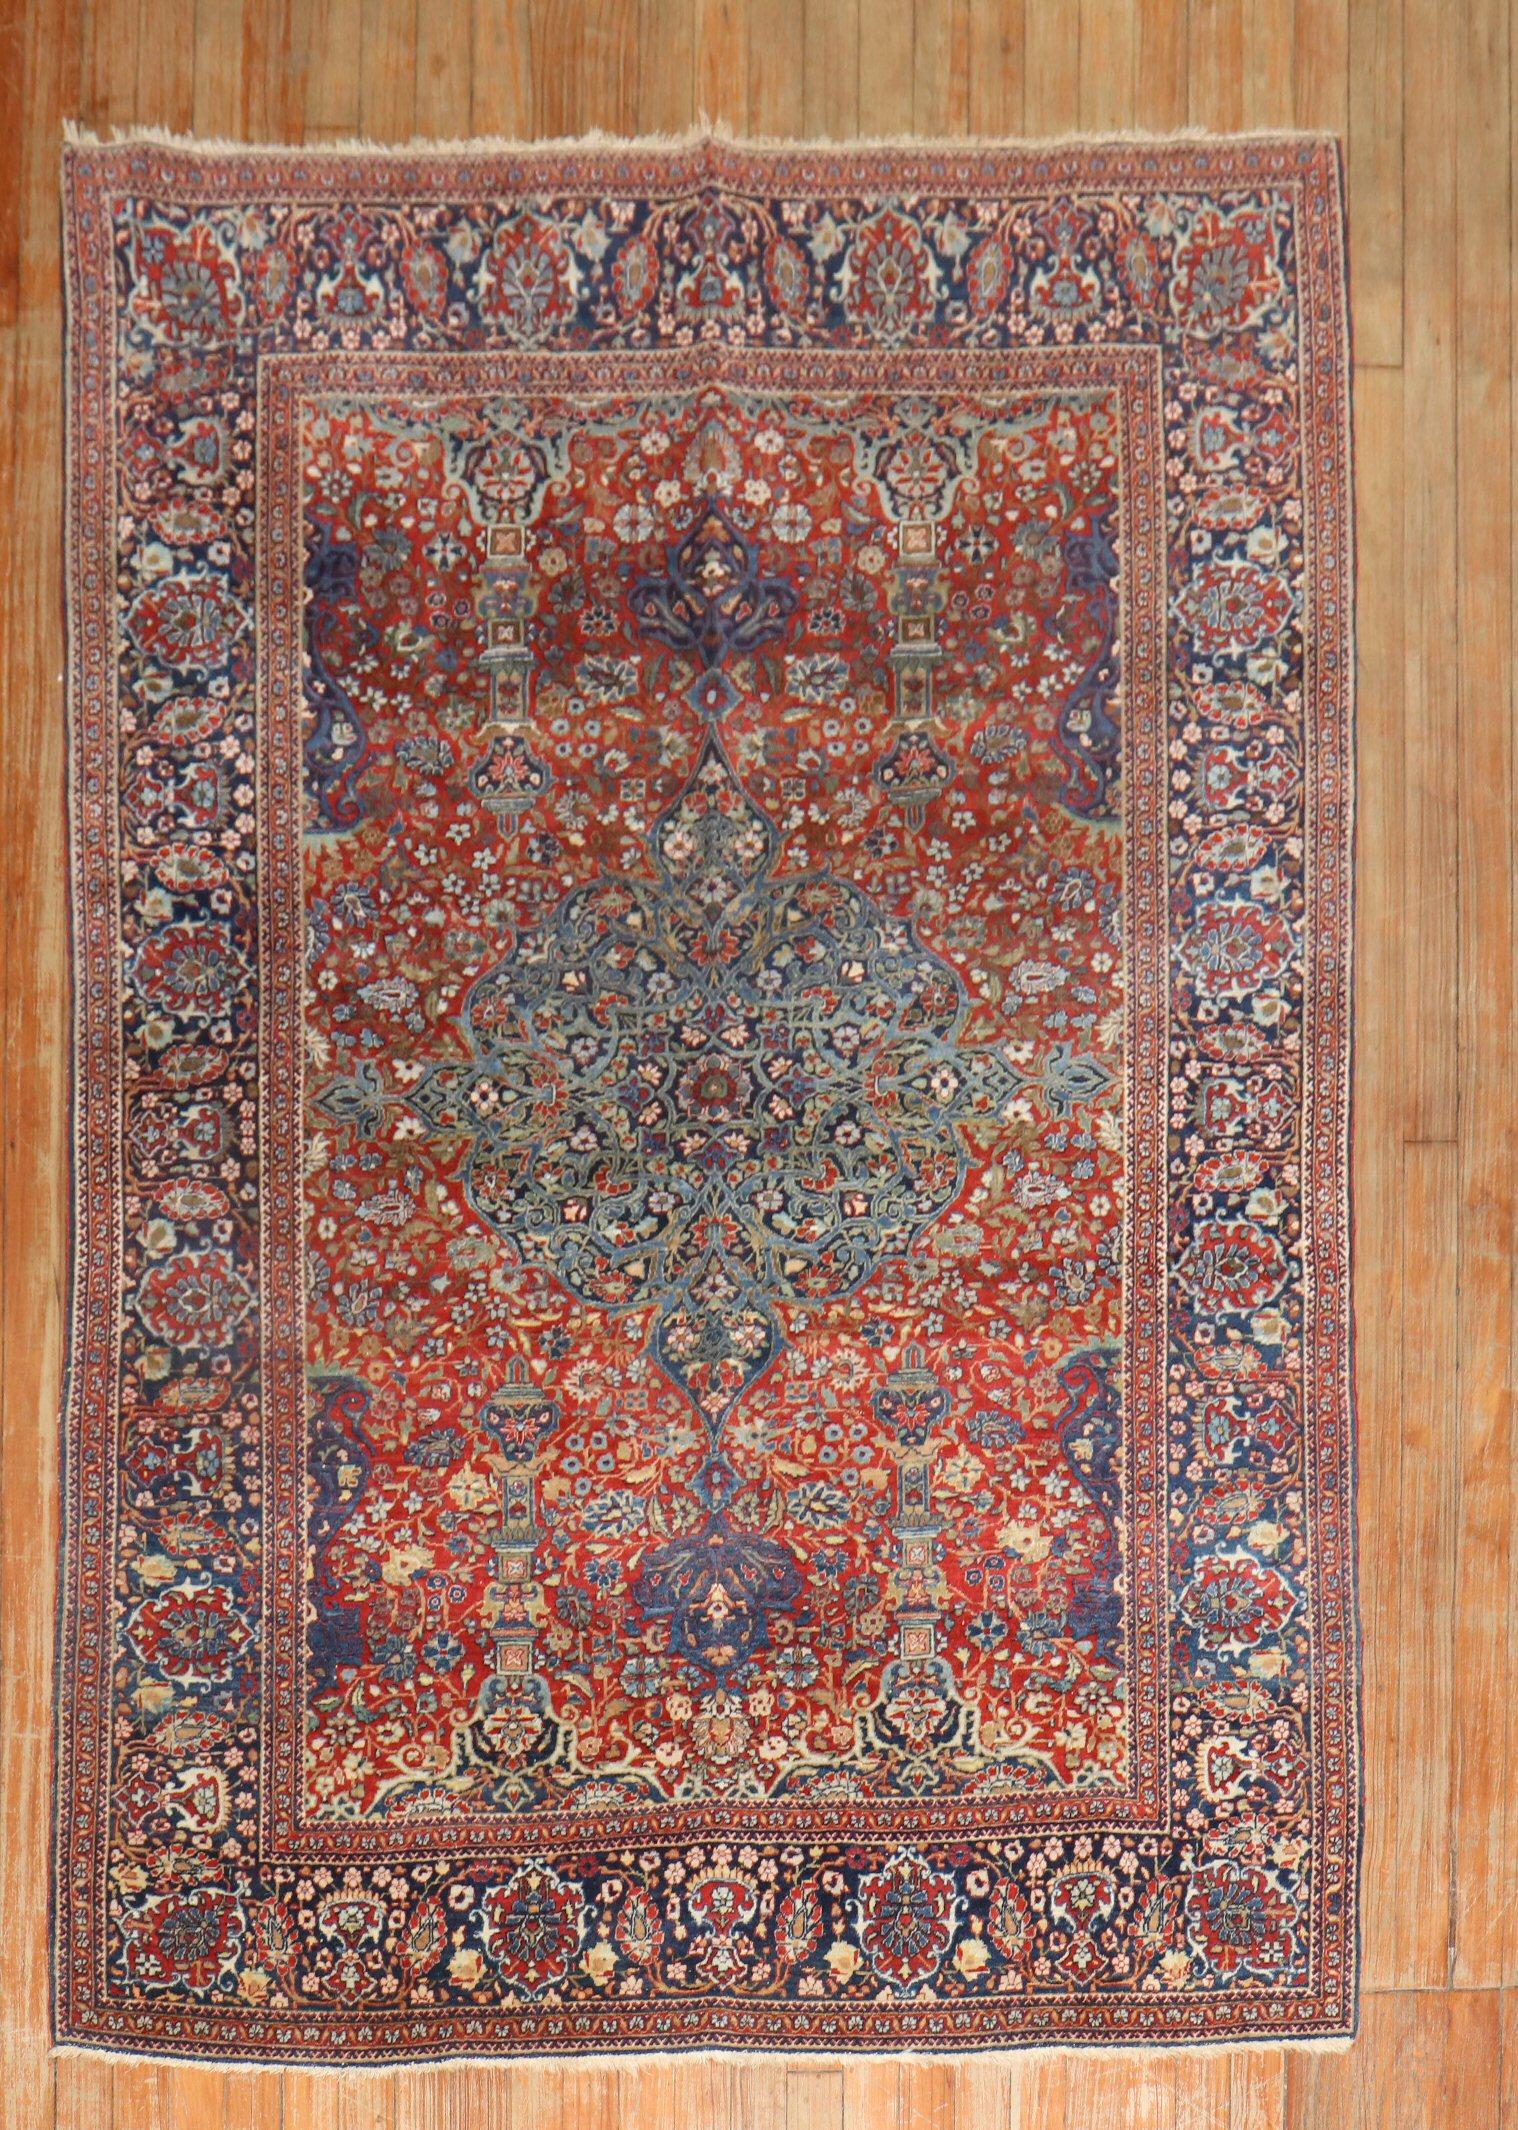 Beautiful Persian Kashan intermediate rug from the first quarter of the 20th century. The previous owner must have kept this rug in phenomenal shape

Measures: 4'5” x 6'8”

The best 19th century and turn-of-the-20th century Kashan carpets, be